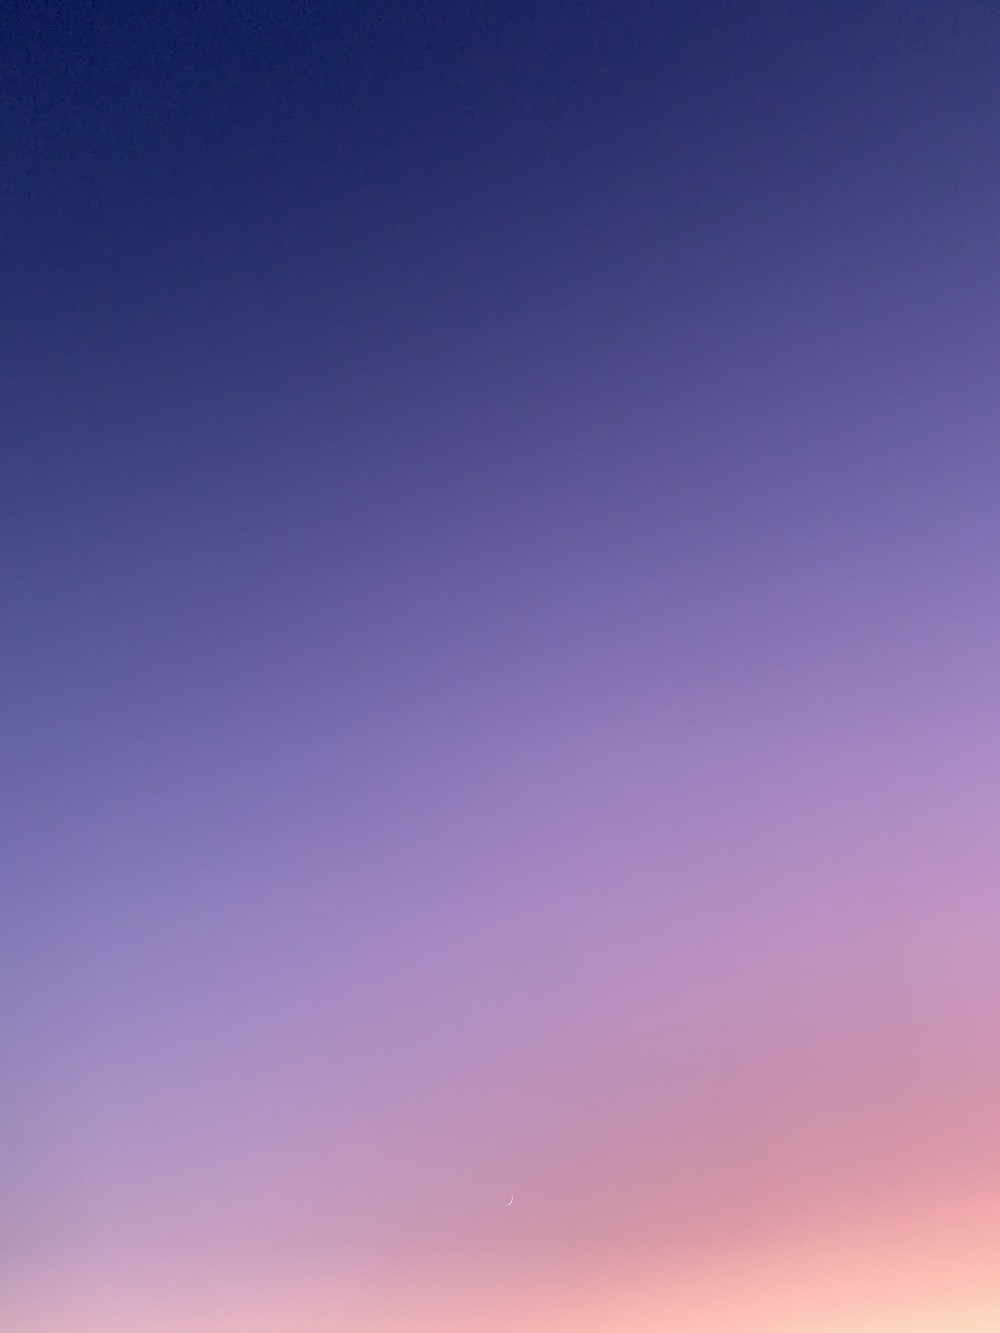 Gradient Sky Picture. Download Free Image